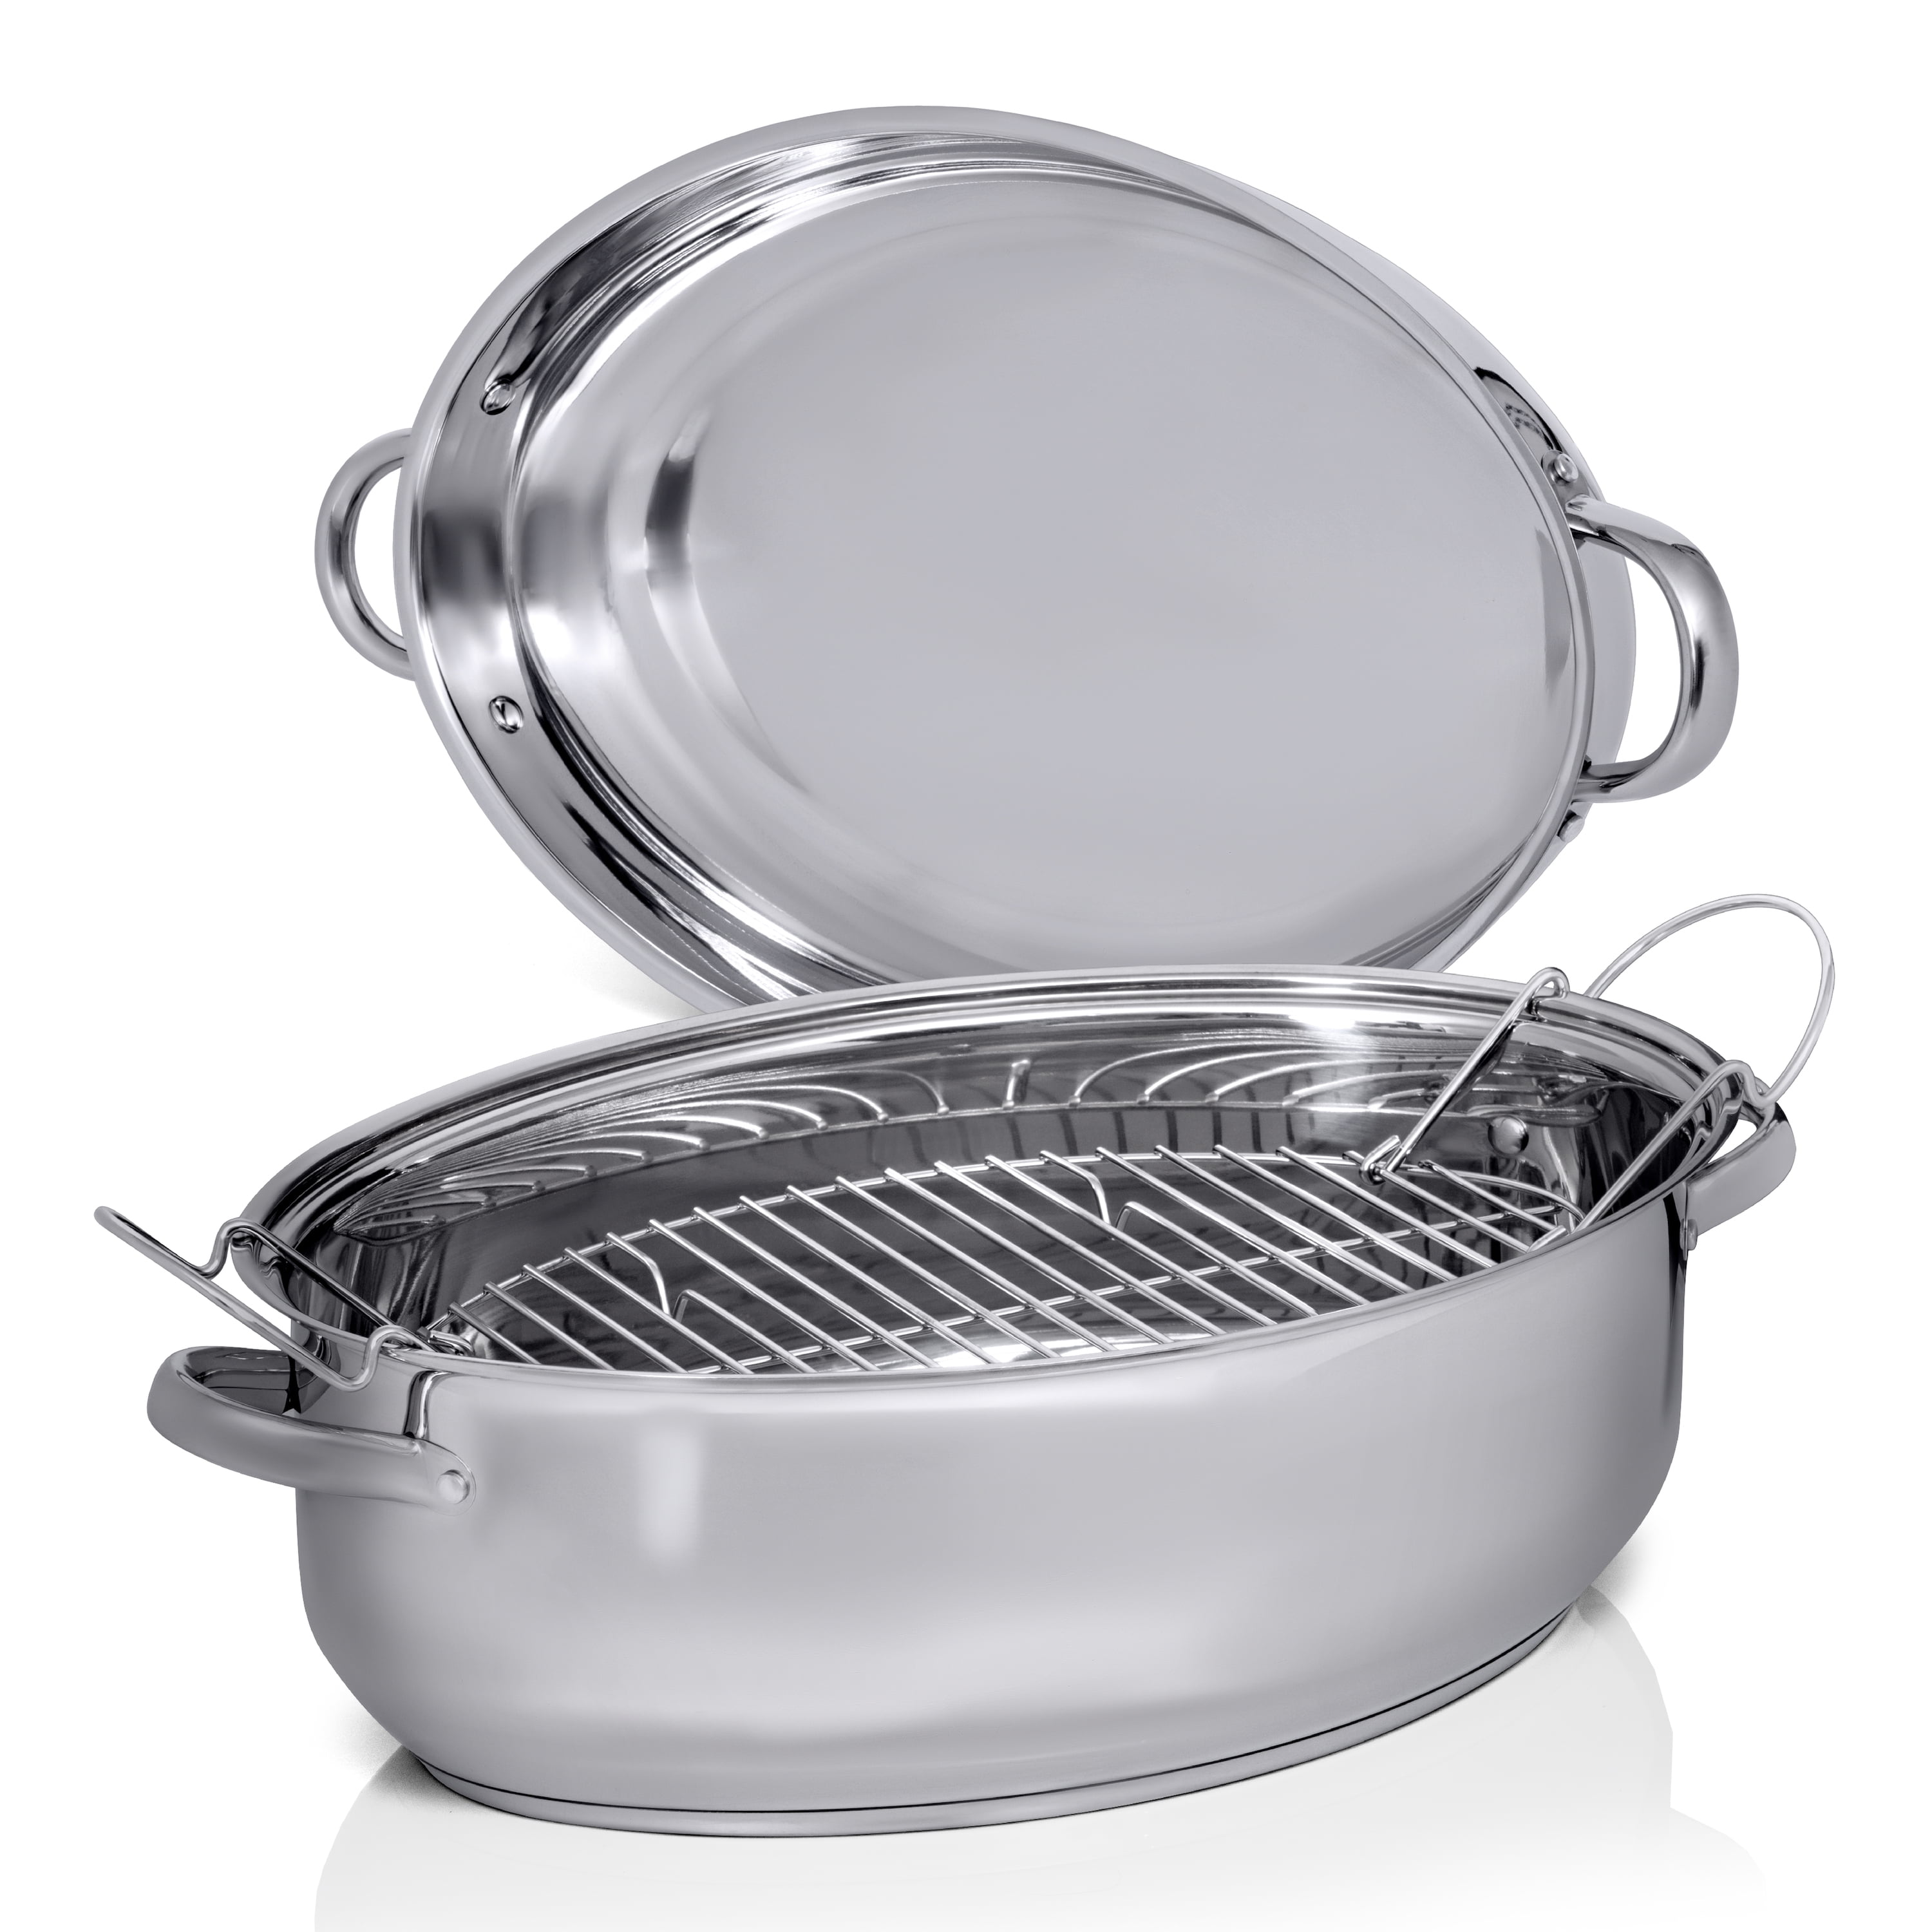 Precise Heat T304 Stainless Steel 16 Rectangular Electric Skillet